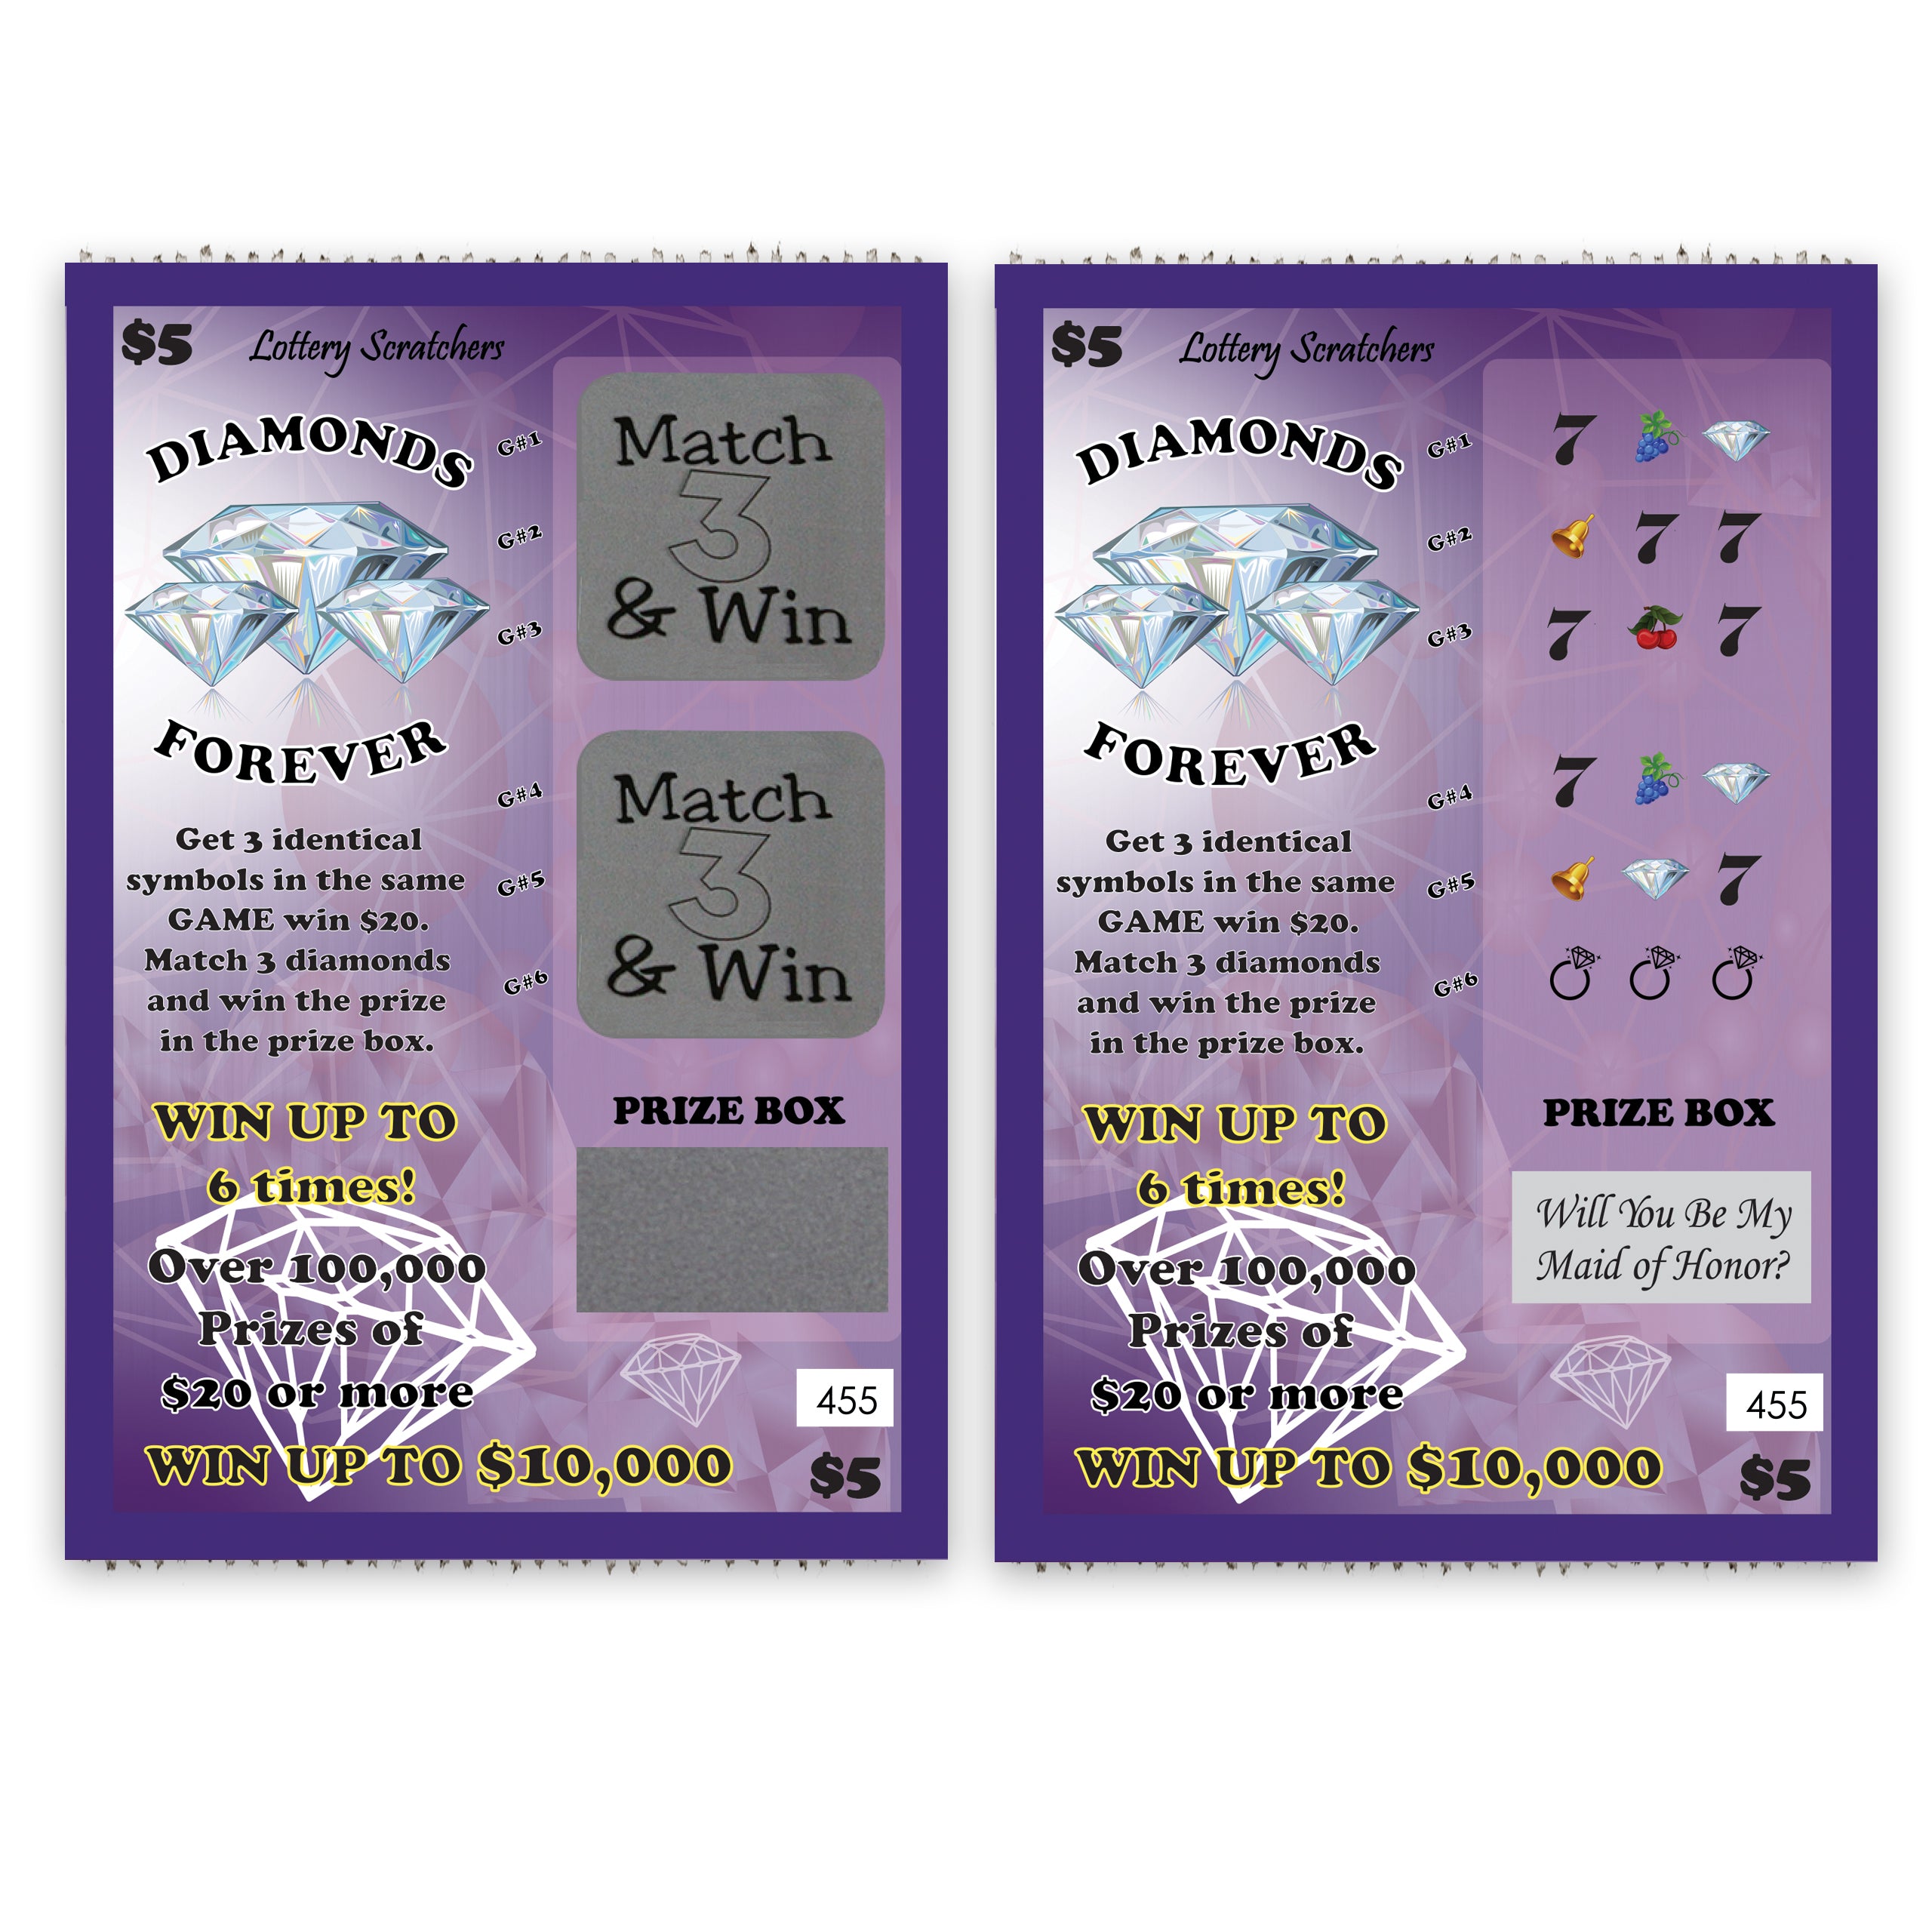 Will You Be My Maid of Honor? Lotto Replica Scratch Off Card 4" x 6" - Purple - My Scratch Offs